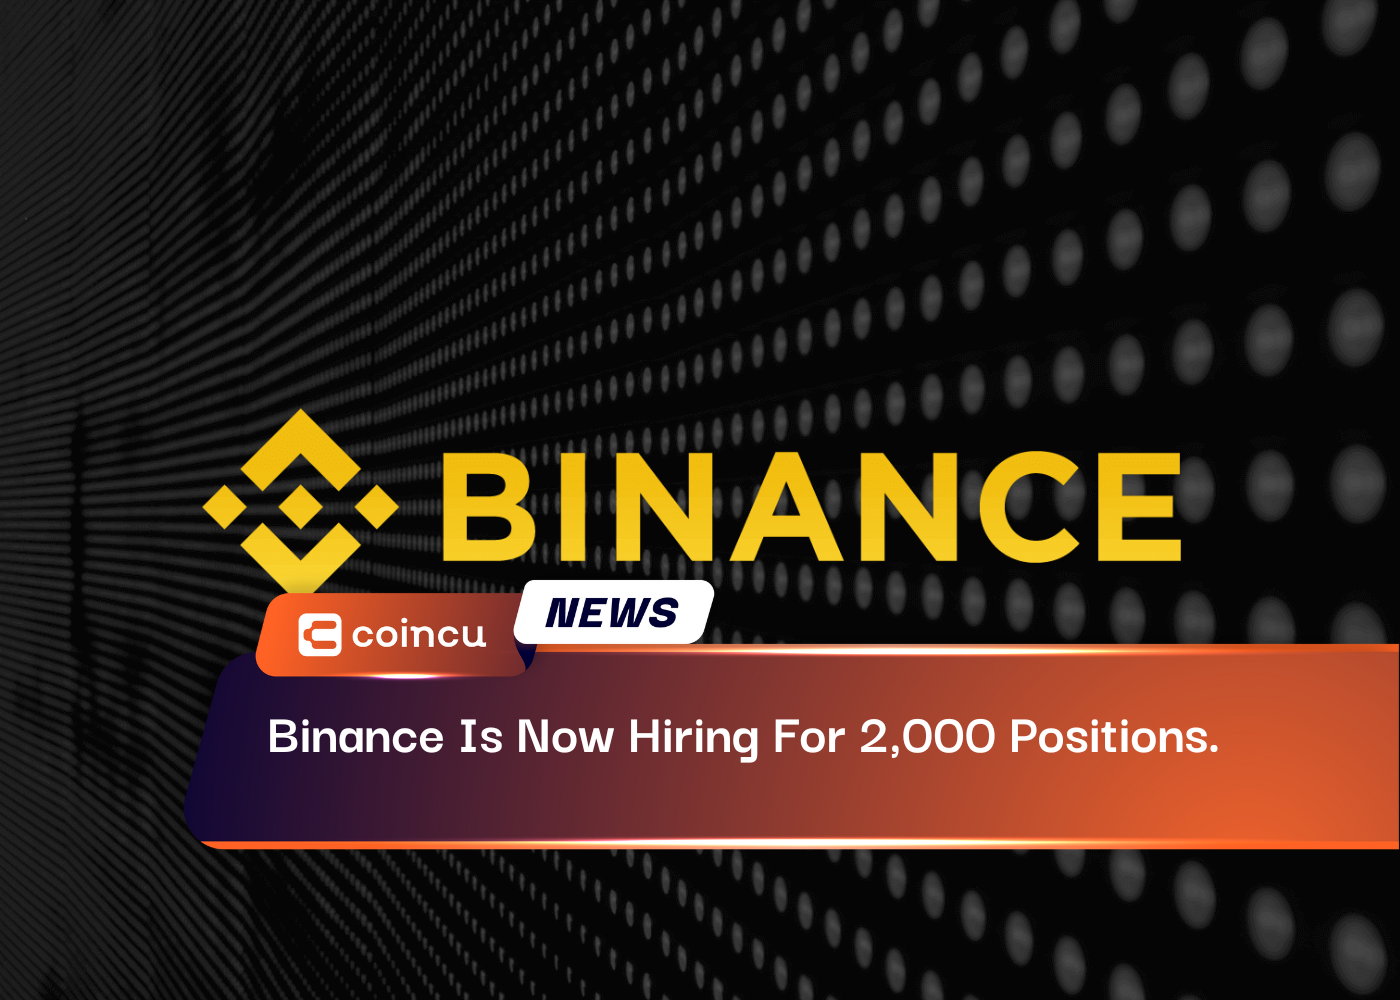 Binance Is Now Hiring For 2,000 Positions.